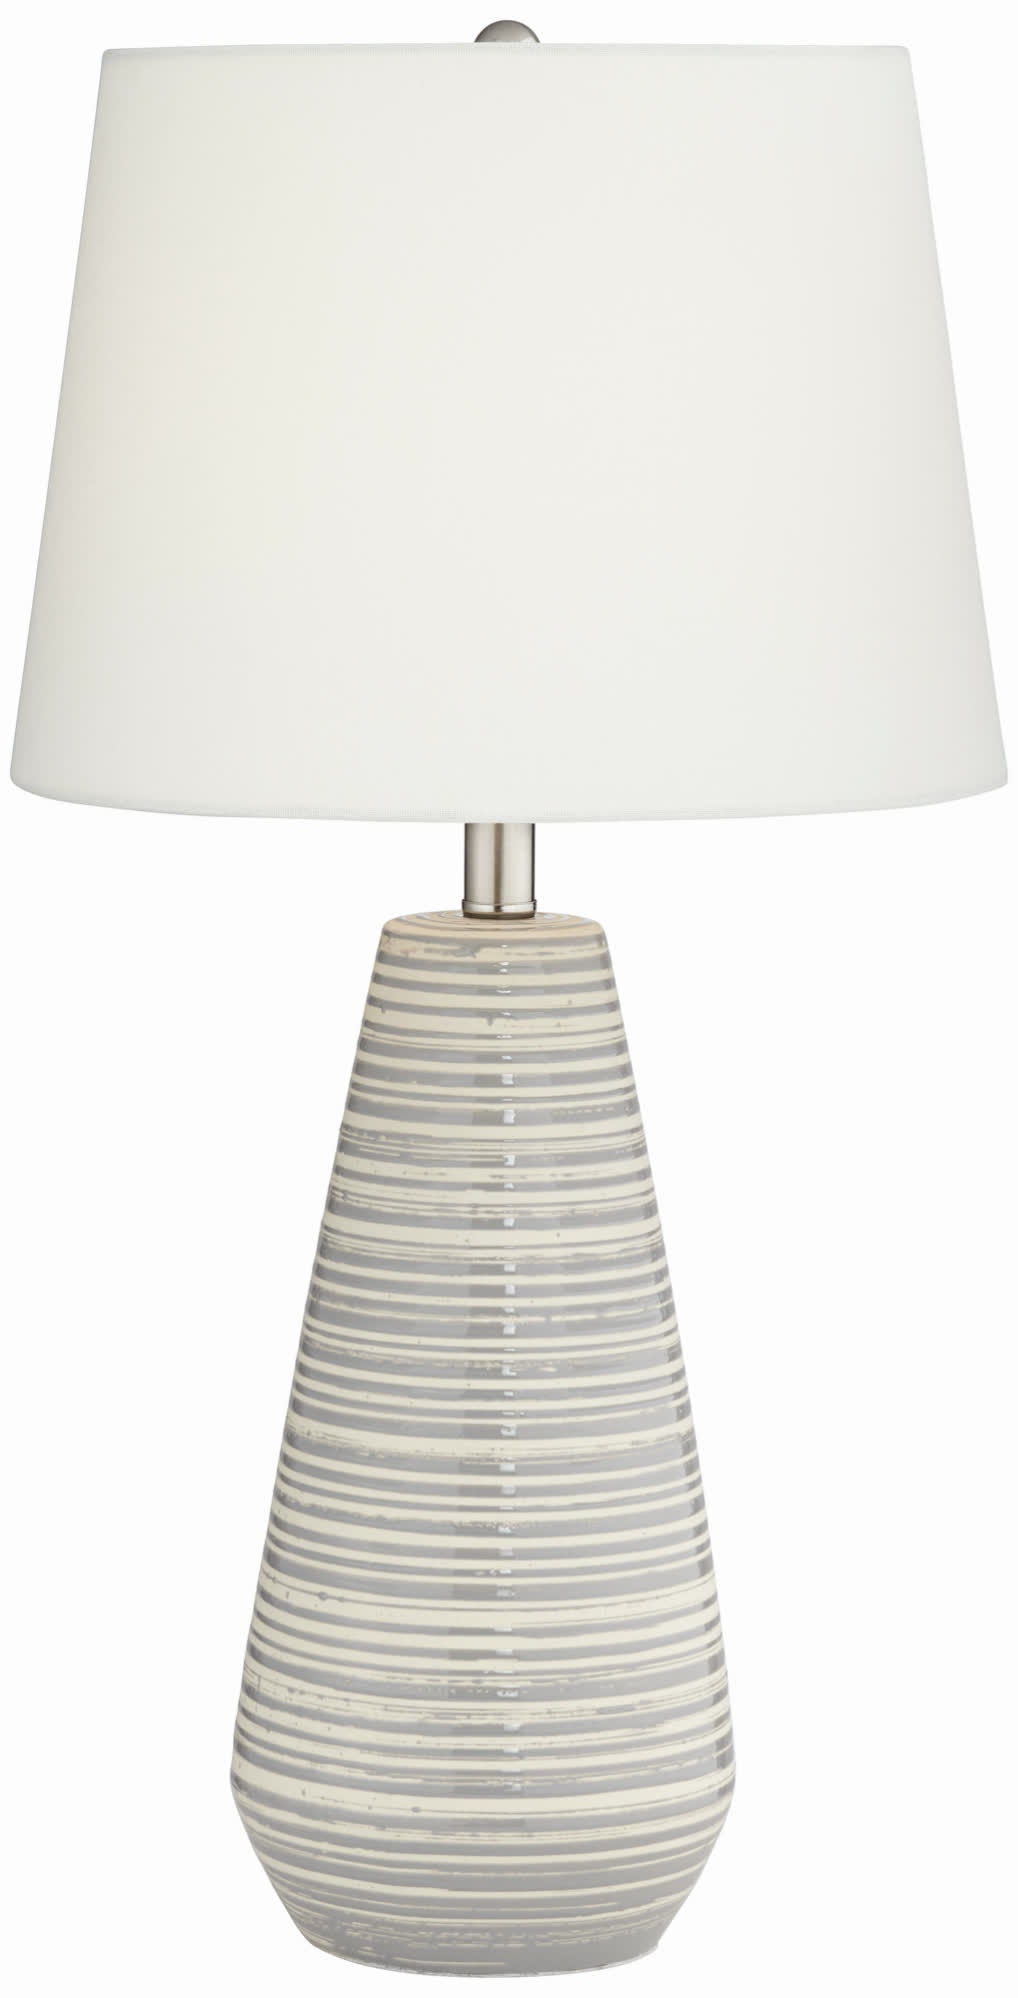 Sully - Table Lamp - Grey